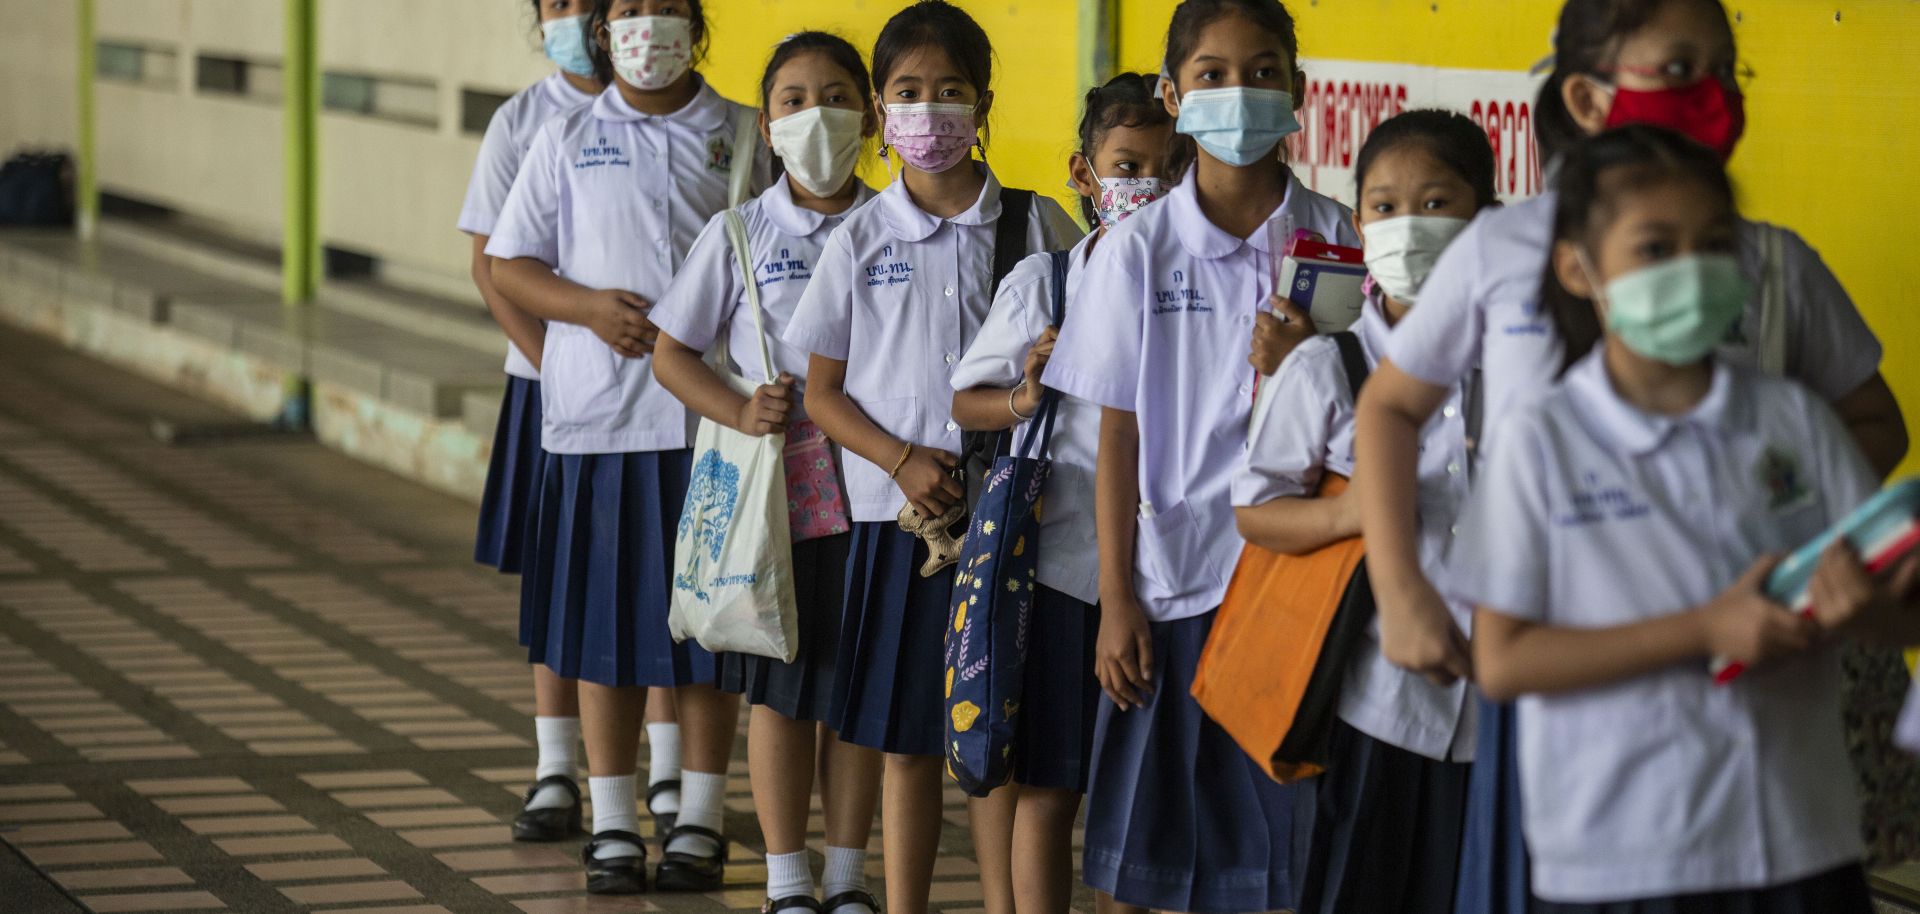  Thai students wear face mask as they stand in line to enter their classroom at the Thai Niyom Songkhrao School